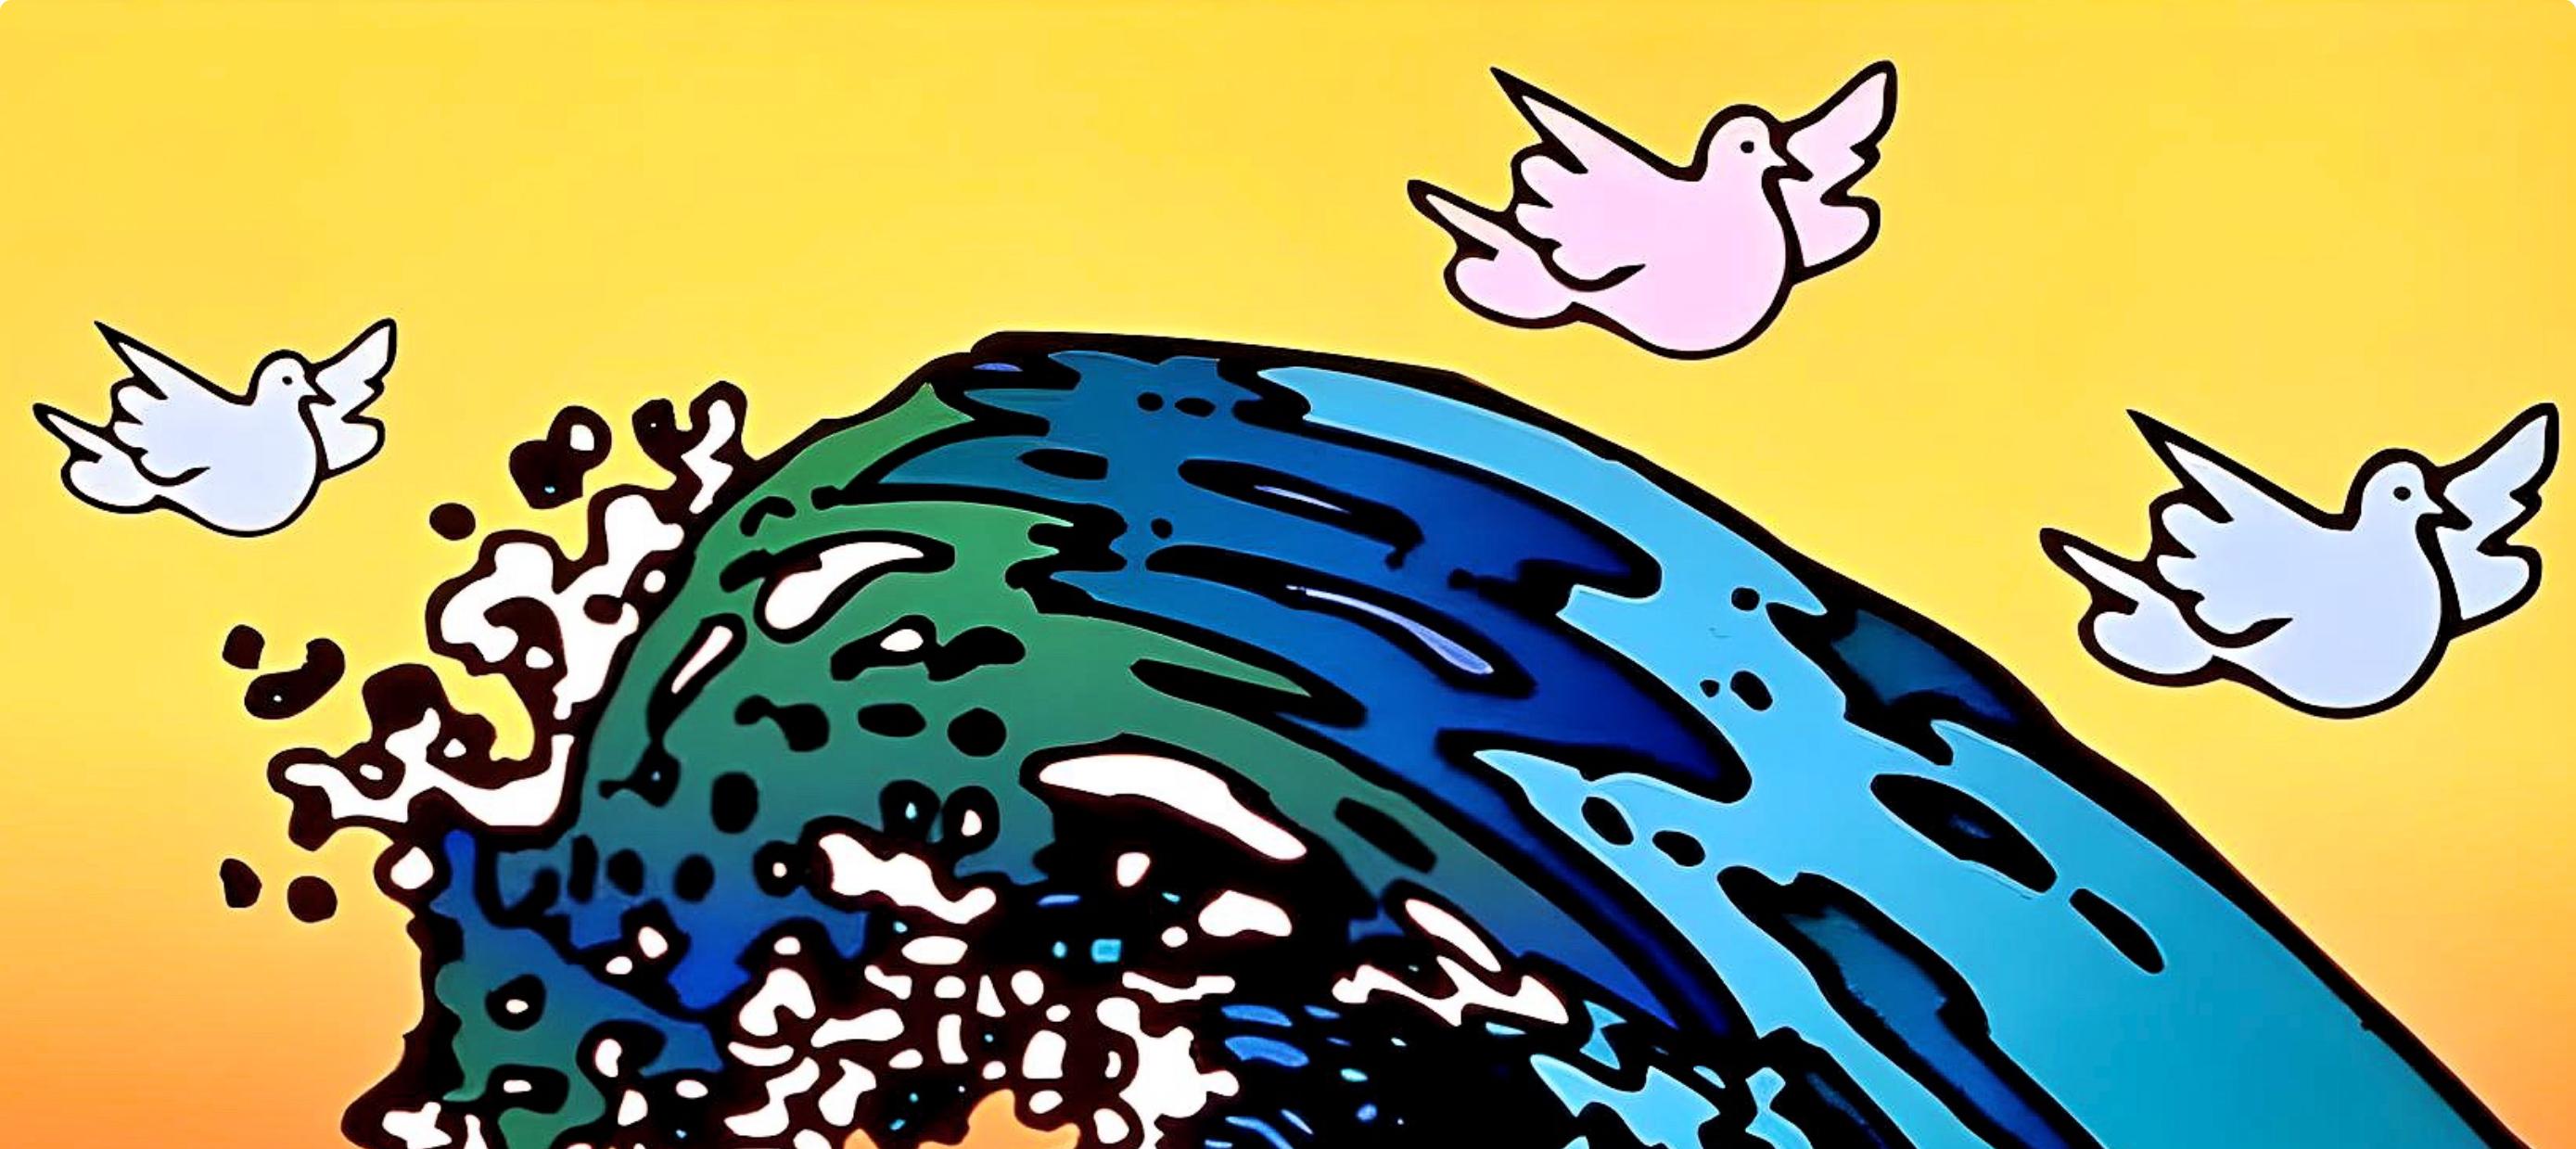 Protect Our Planet Ver. II, Peter Max 2